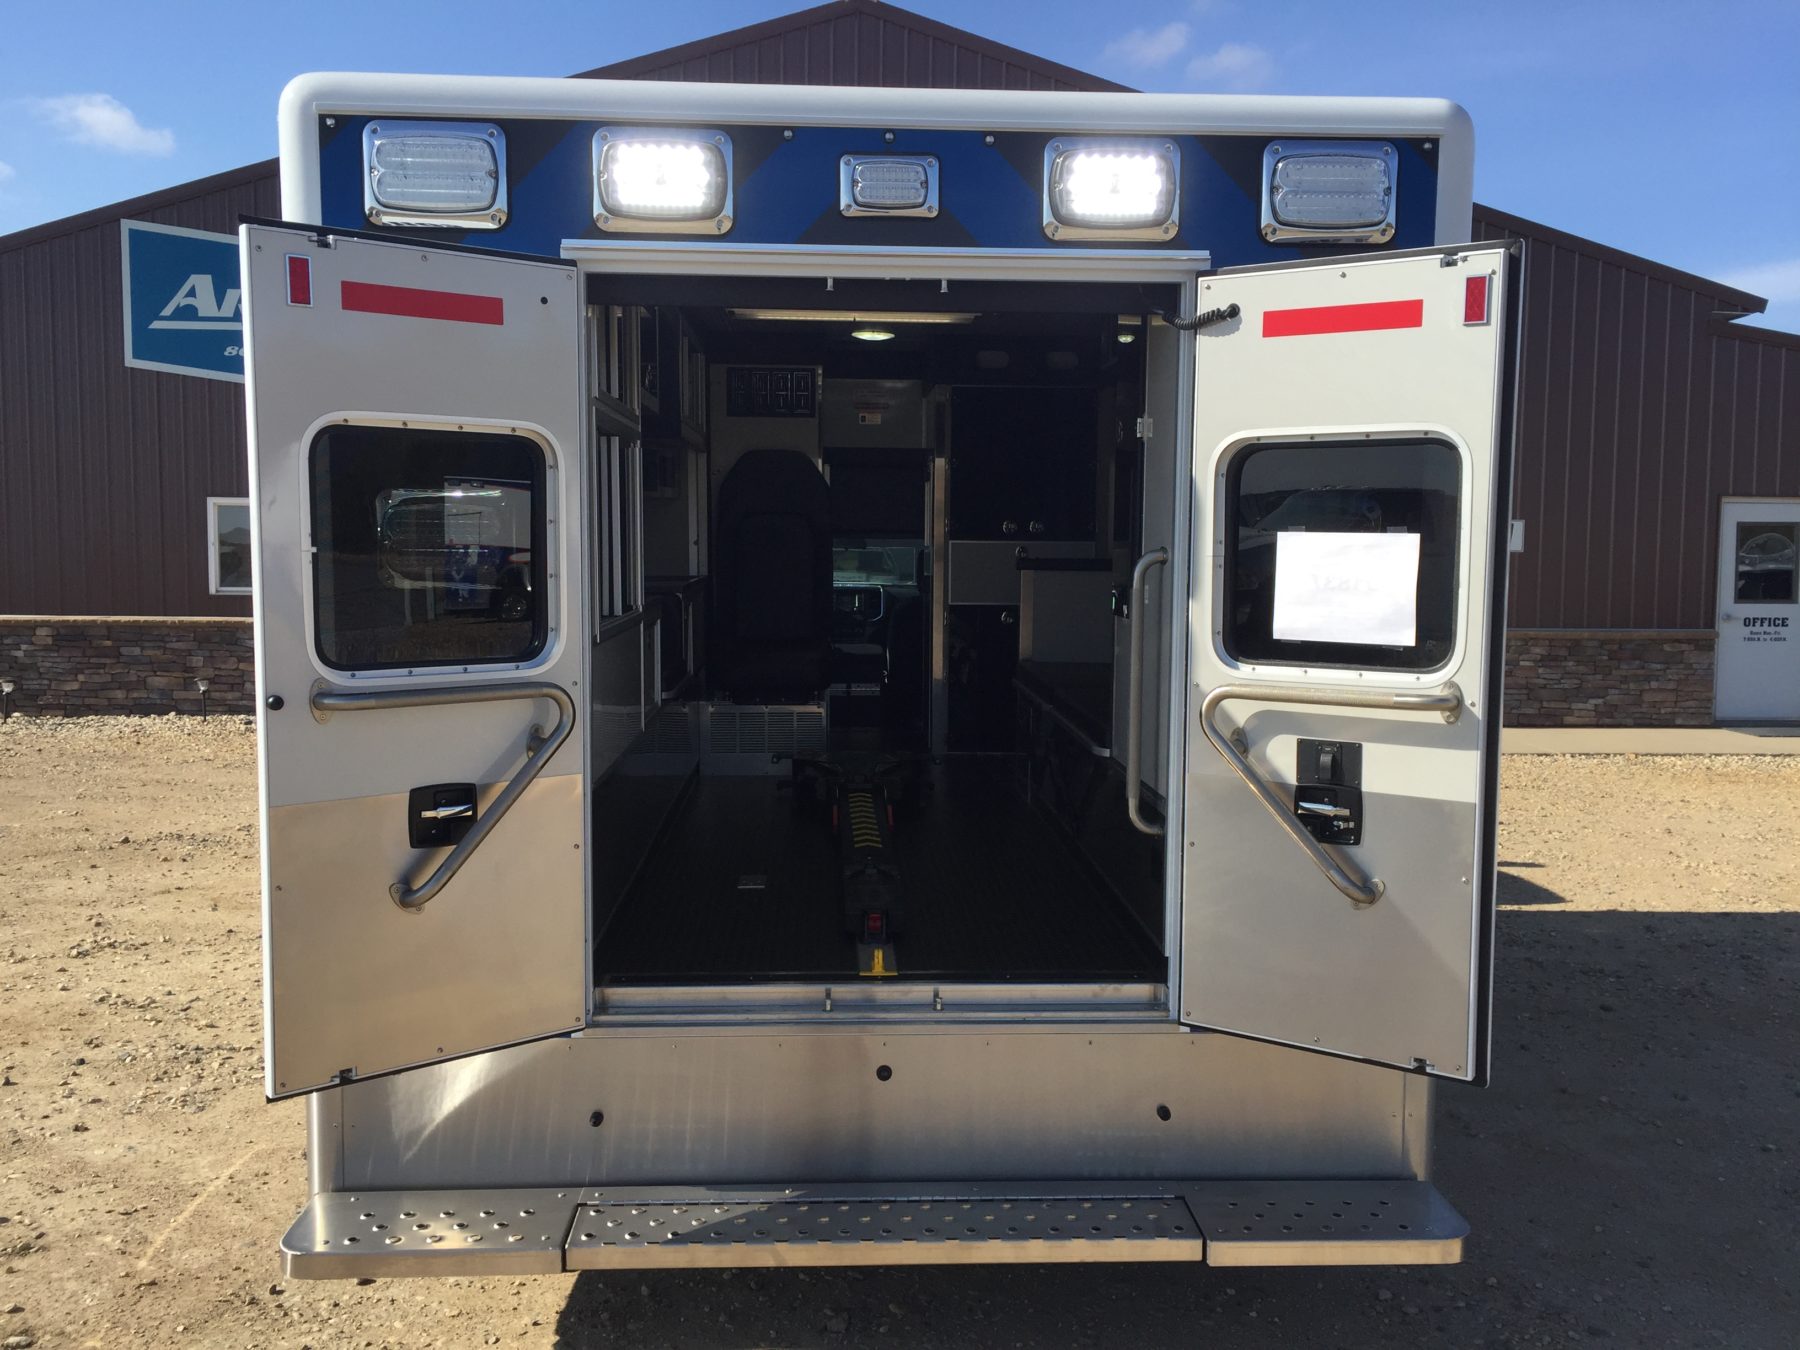 2019 Ram 4500 4x4 Heavy Duty Ambulance For Sale – Picture 8